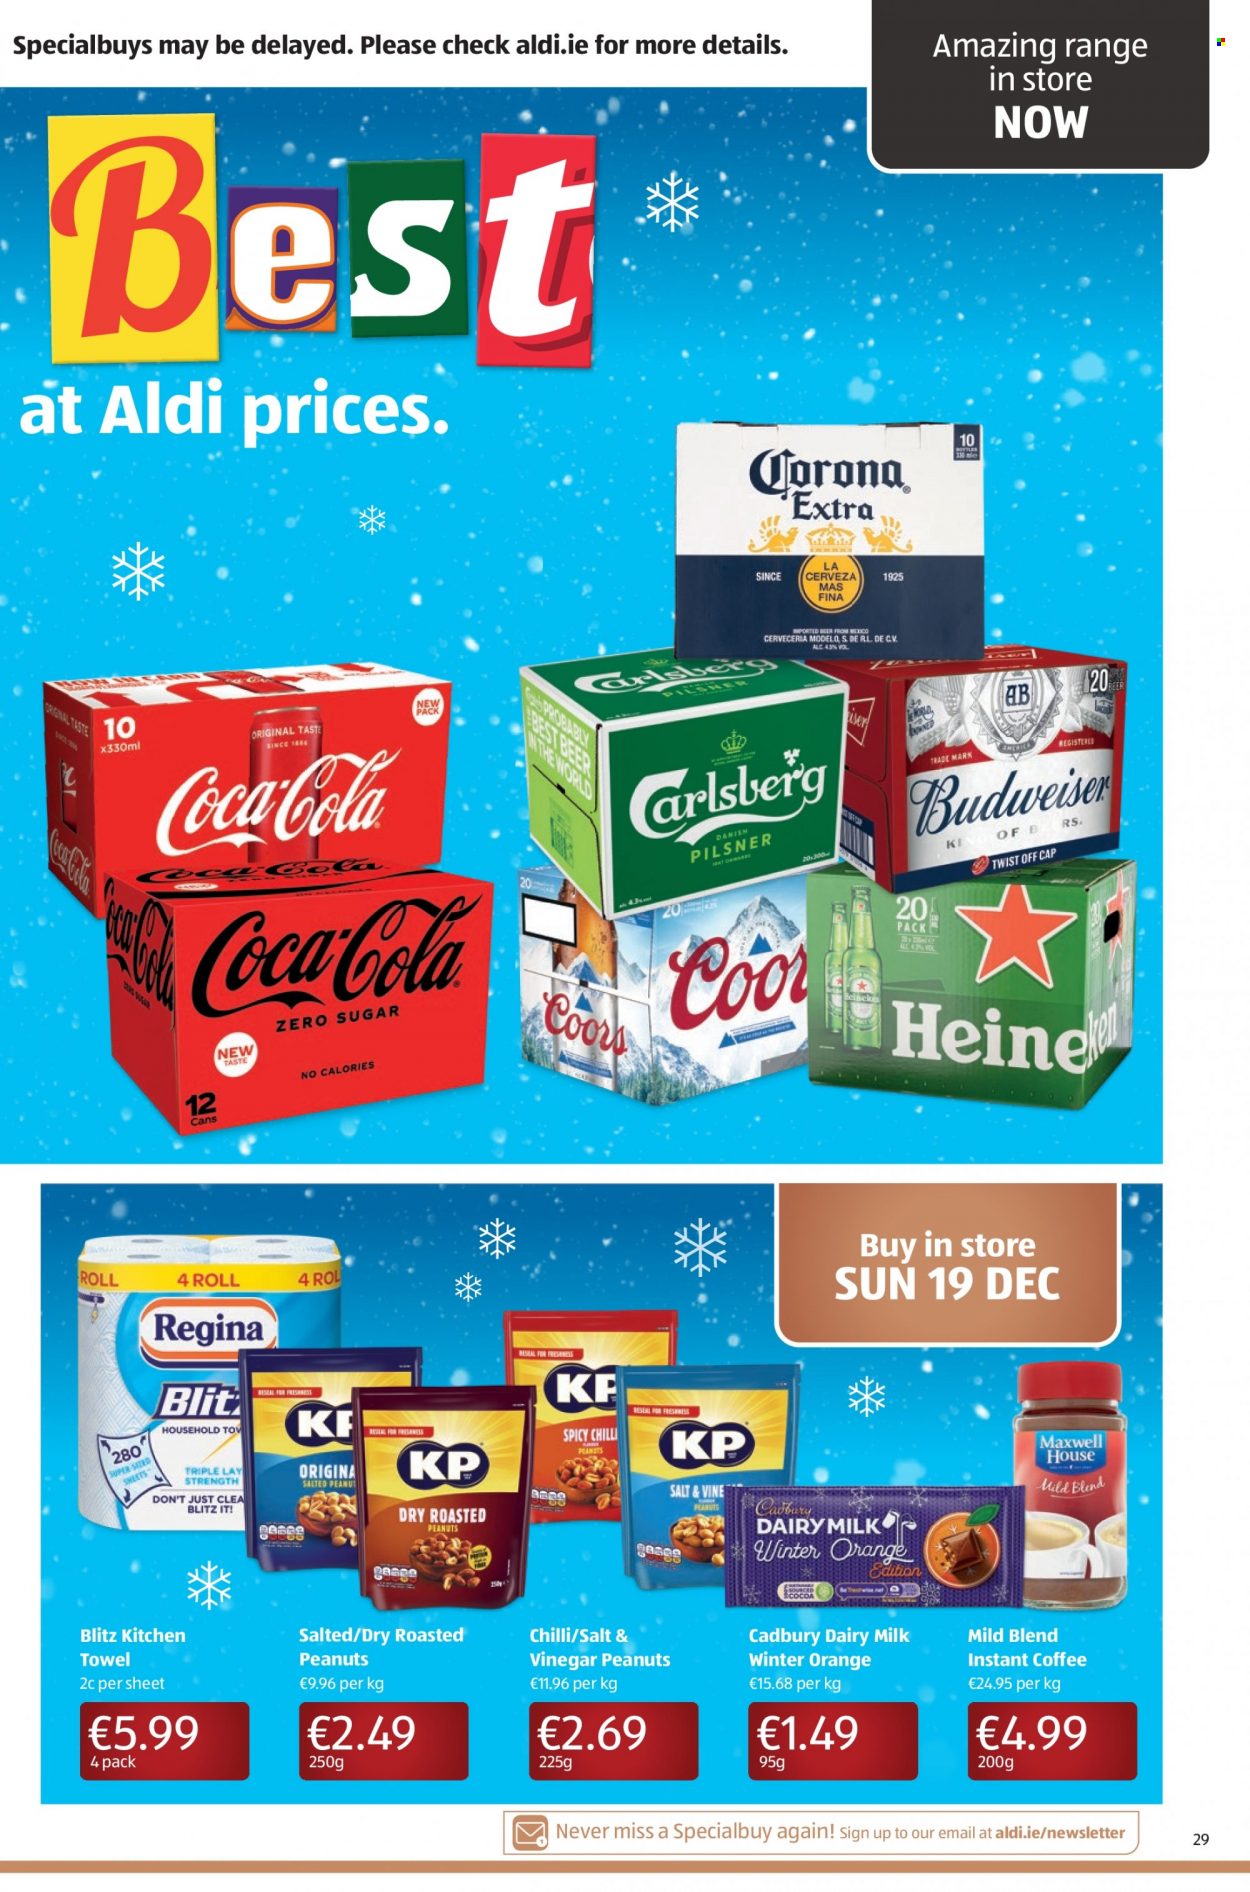 thumbnail - Aldi offer  - 13.12.2021 - 19.12.2021 - Sales products - oranges, Cadbury, Dairy Milk, vinegar, roasted peanuts, peanuts, Coca-Cola, Maxwell House, instant coffee, beer, Corona Extra, Modelo, towel, cap, Budweiser, Coors. Page 29.